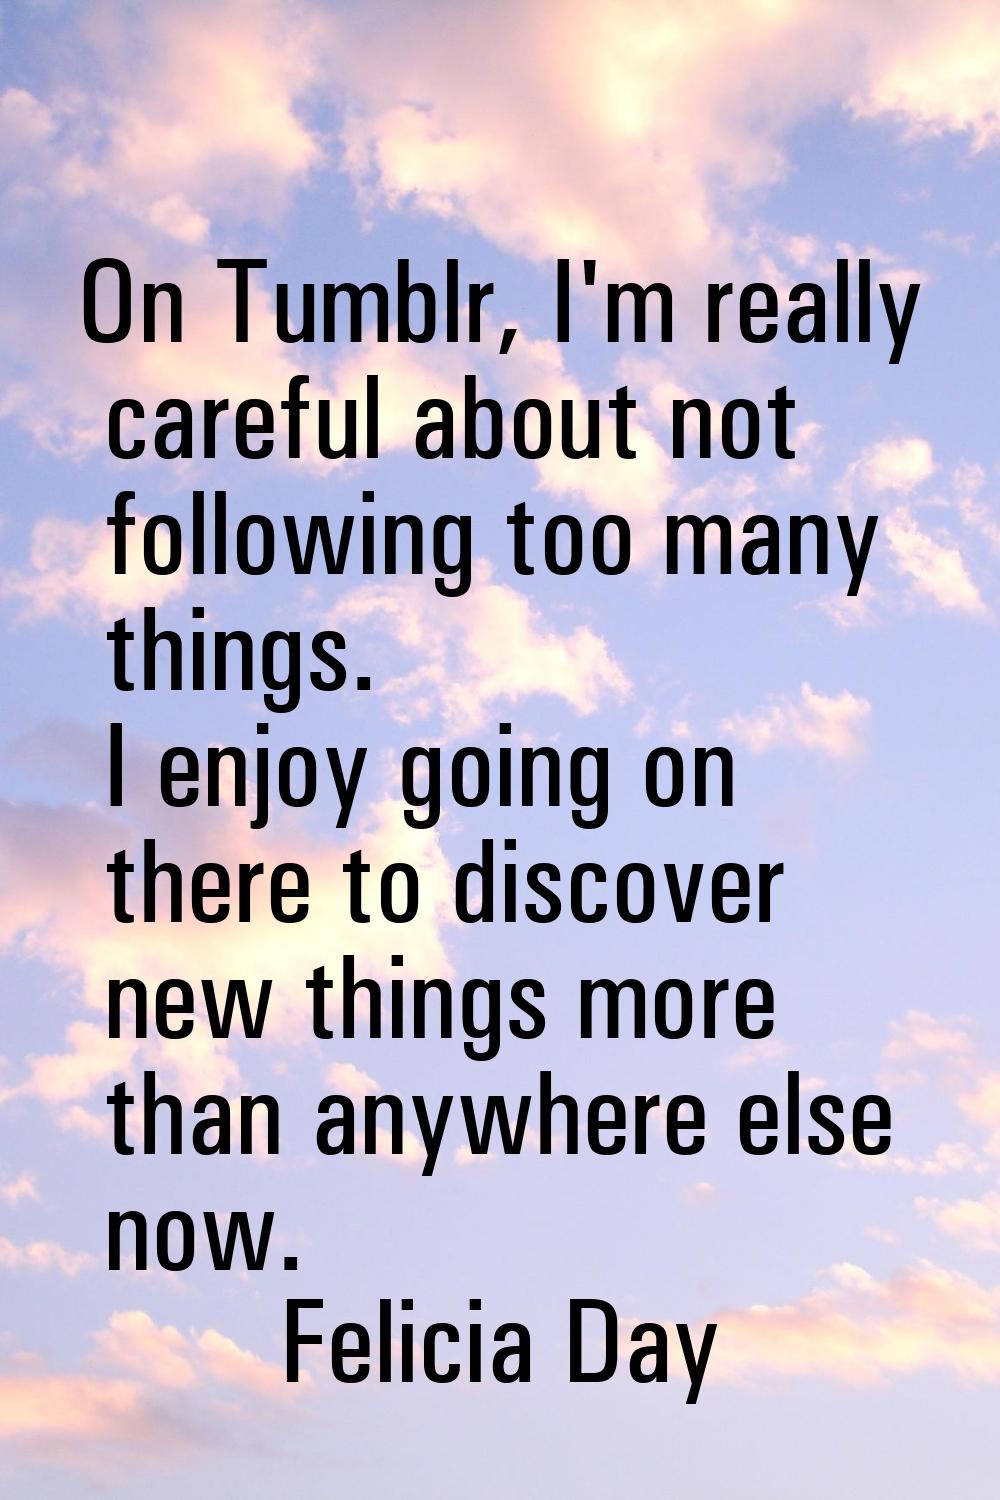 On Tumblr, I'm really careful about not following too many things. I enjoy going on there to discov